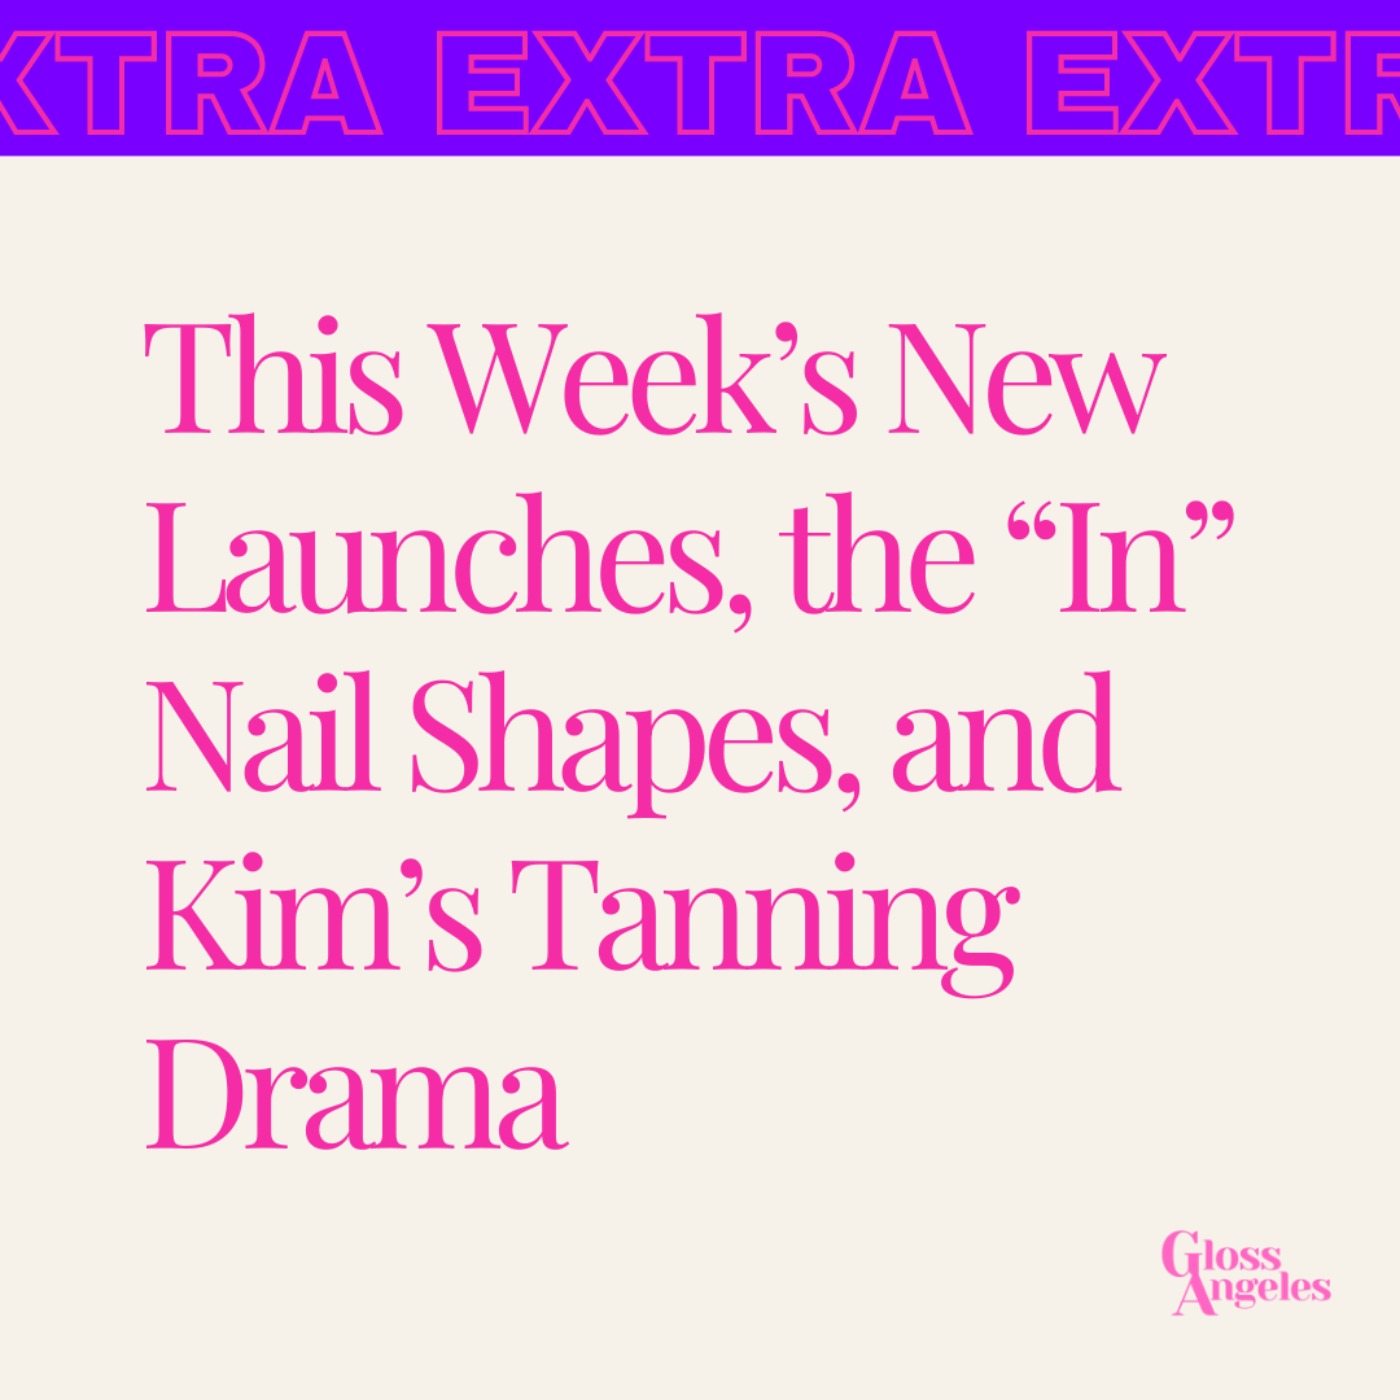 This Week’s New Launches, the “In” Nail Shapes, and Kim’s Tanning Drama